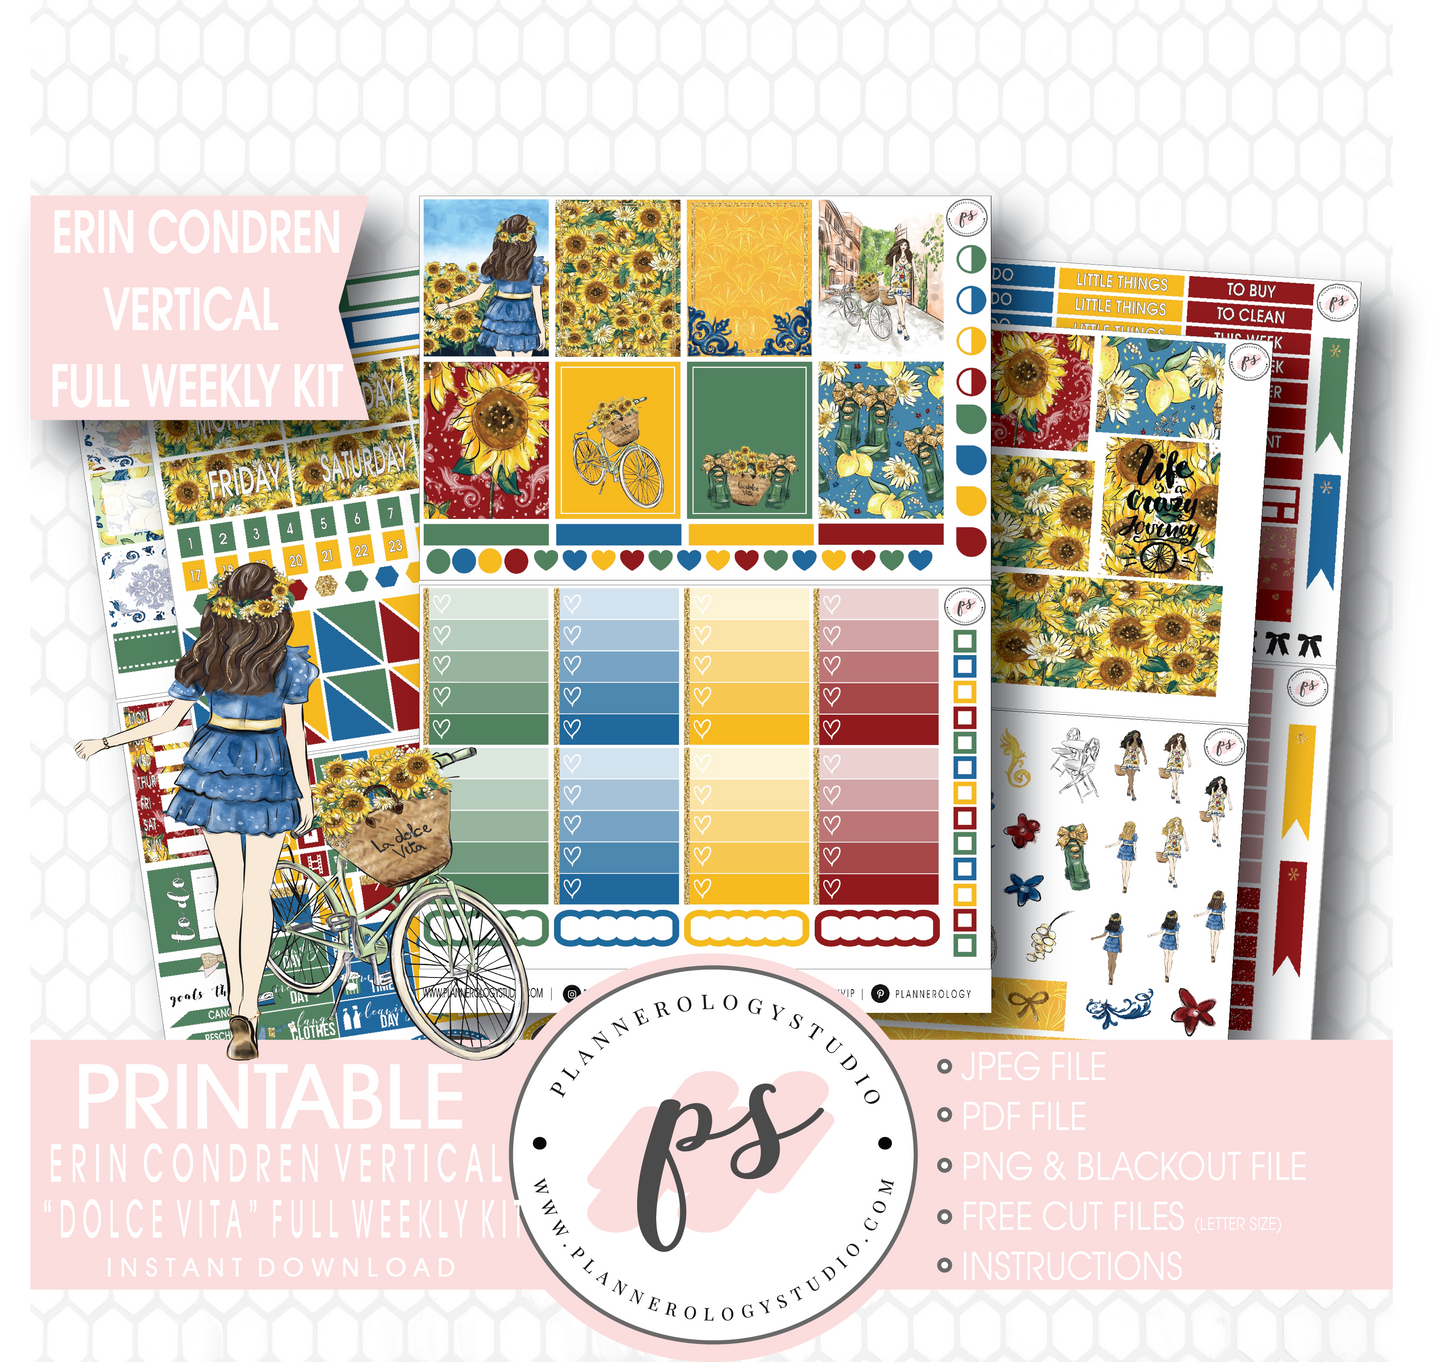 Dolce Vita Full Weekly Kit Printable Planner Stickers (for use with Erin Condren Vertical) - Plannerologystudio